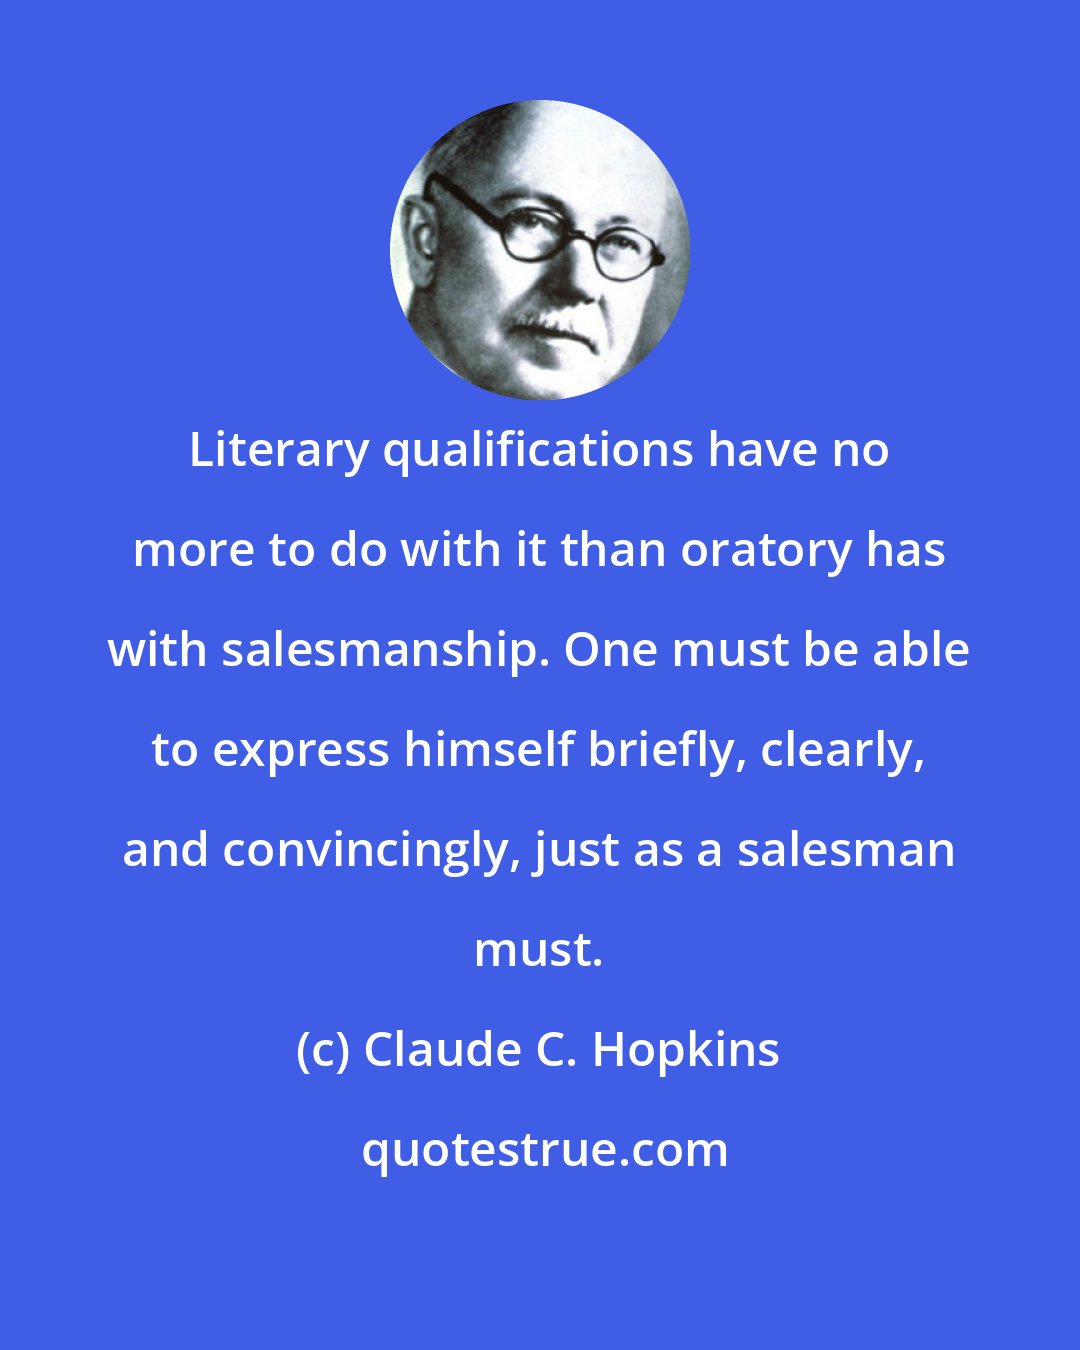 Claude C. Hopkins: Literary qualifications have no more to do with it than oratory has with salesmanship. One must be able to express himself briefly, clearly, and convincingly, just as a salesman must.